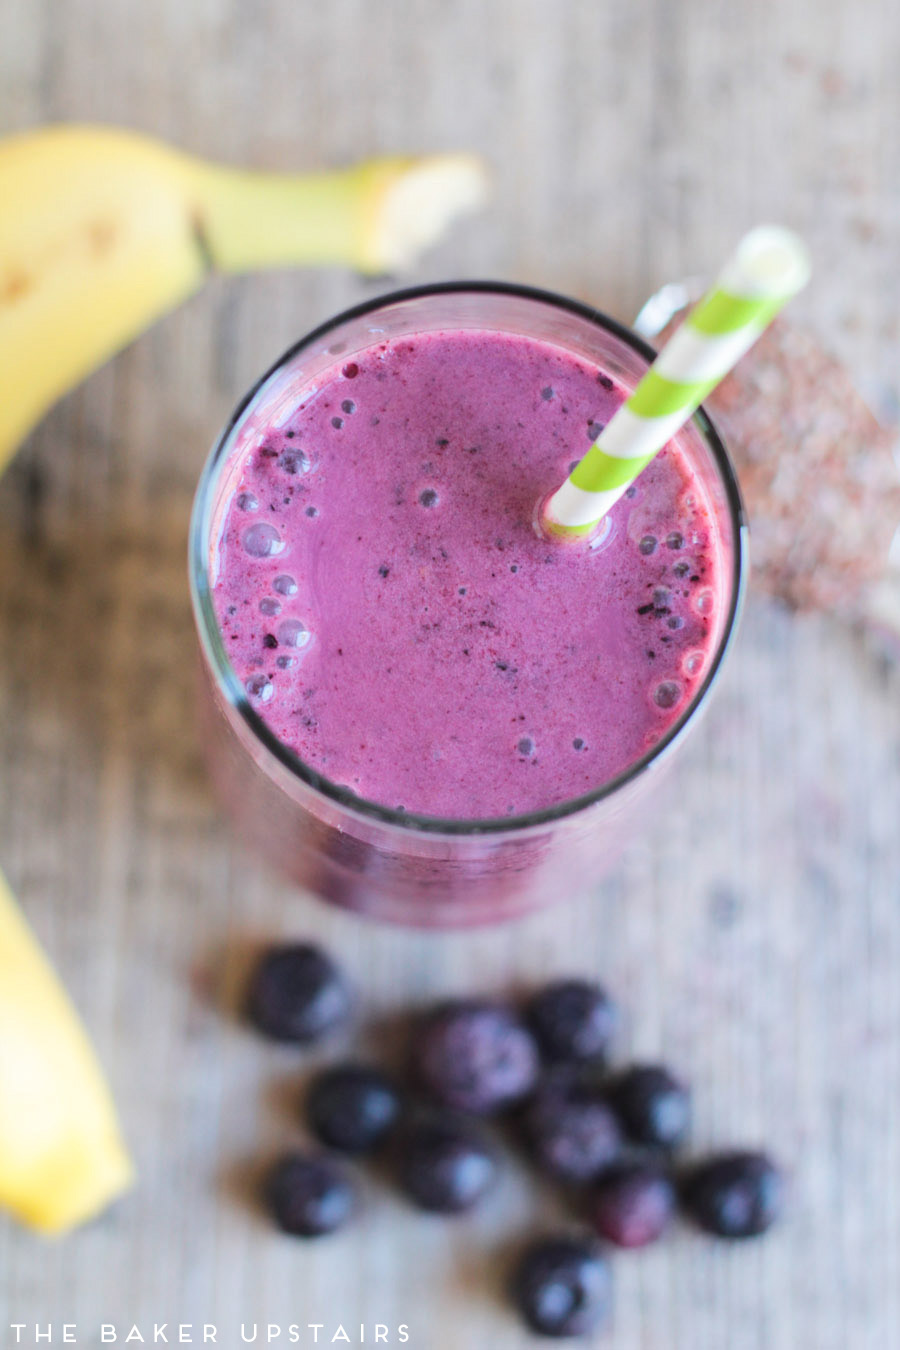 This blueberry pomegranate smoothie is so sweet, tangy, and flavorful! It has just a handful of ingredients, and is so easy to make!